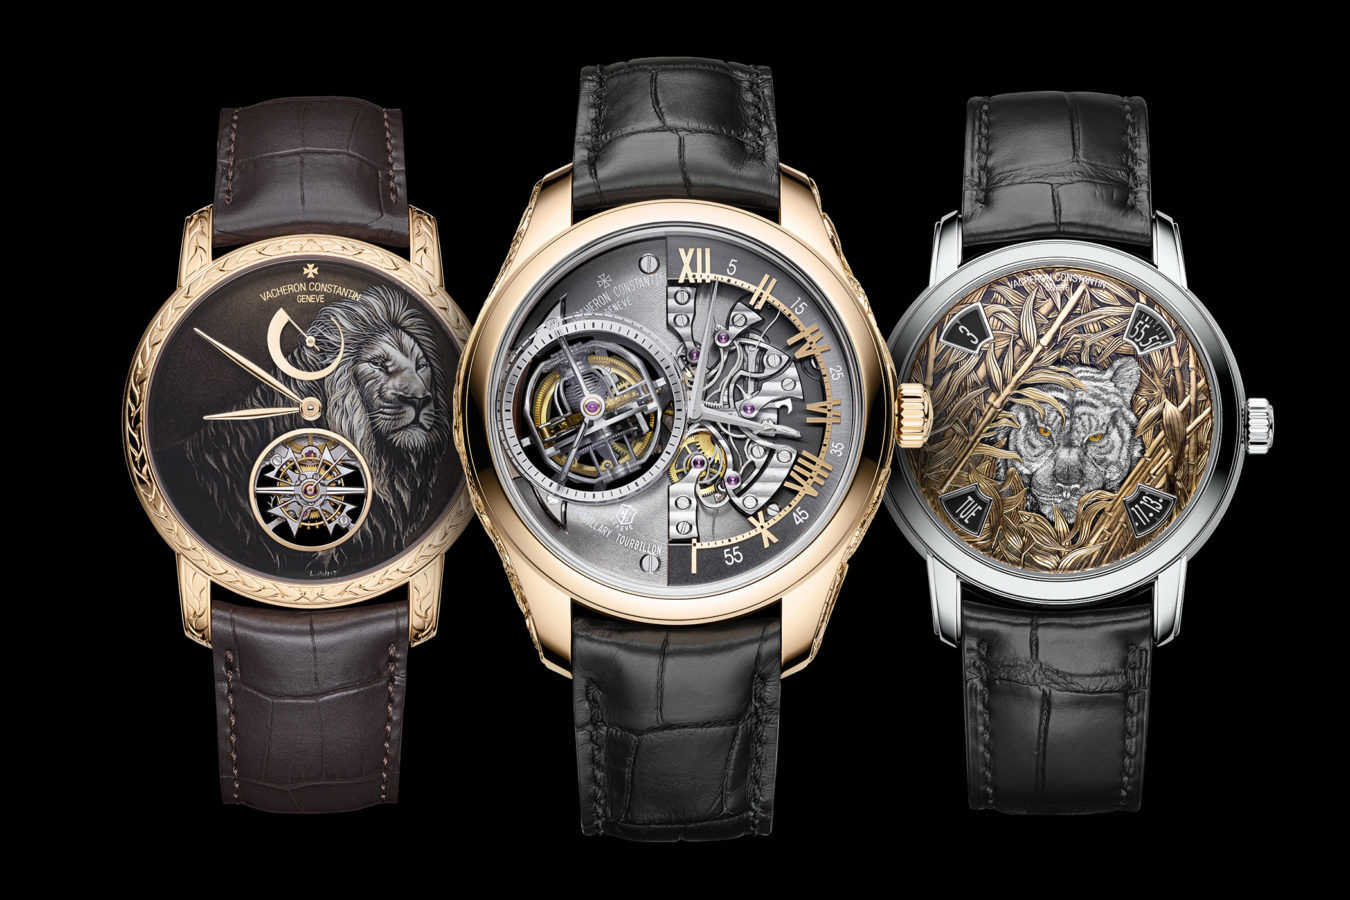 Welcome to the jungle: 7 timepieces inspired by the animal kingdom